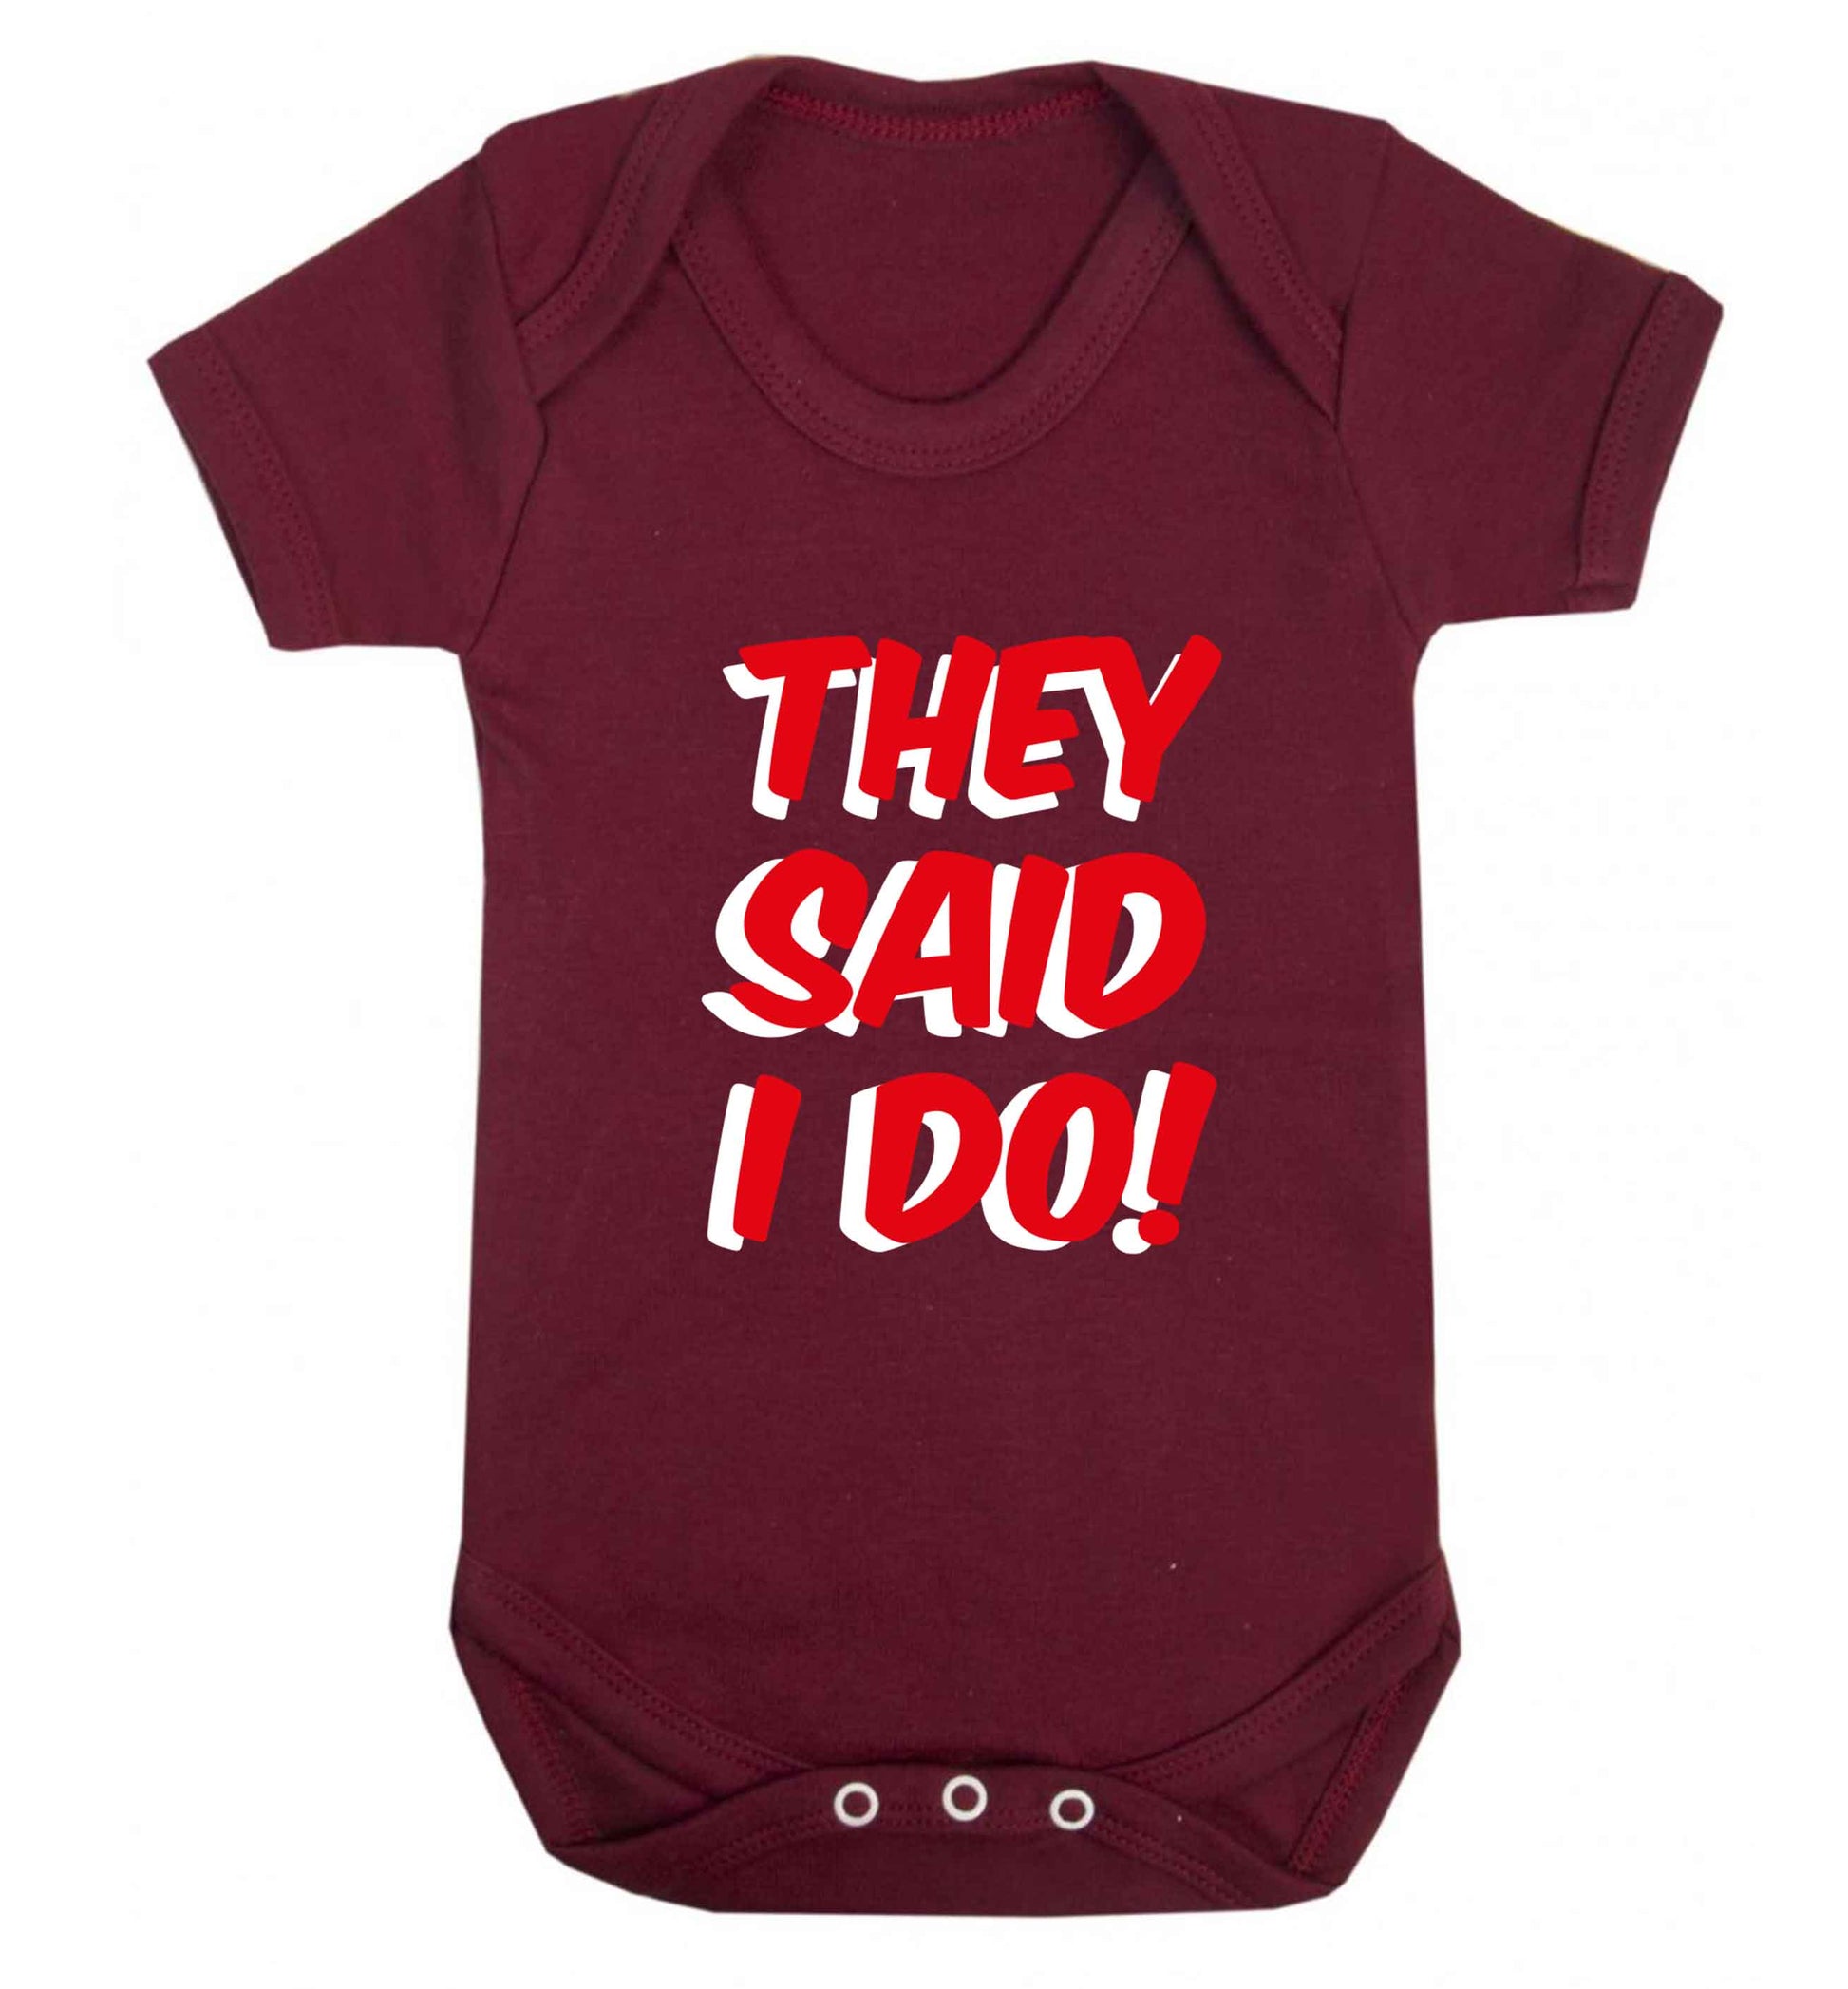 They said I do baby vest maroon 18-24 months